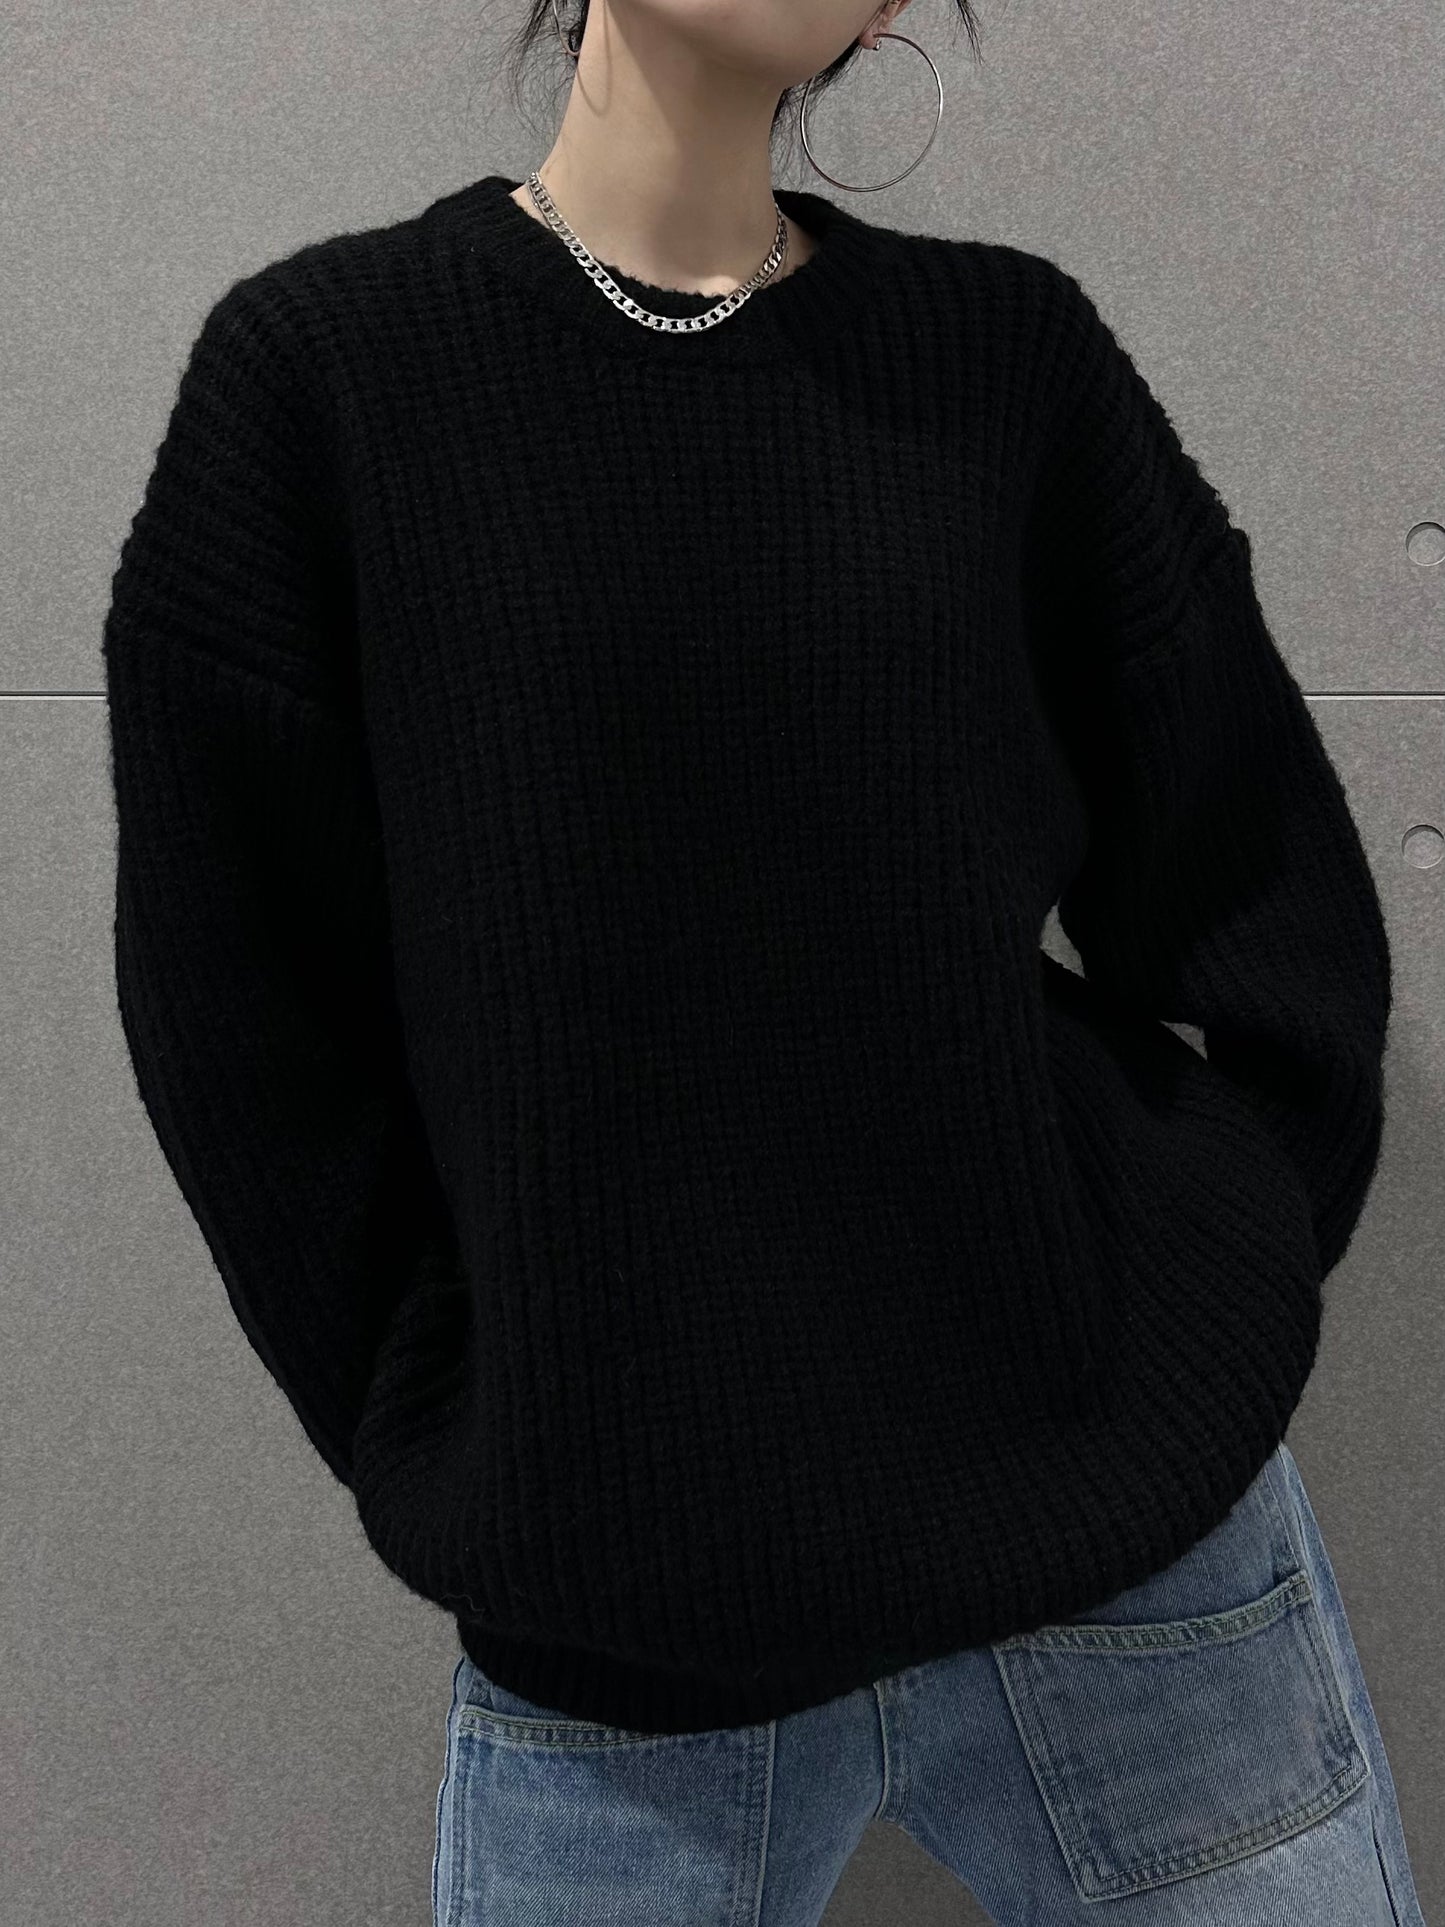 Unisex Cable Knit Sweater